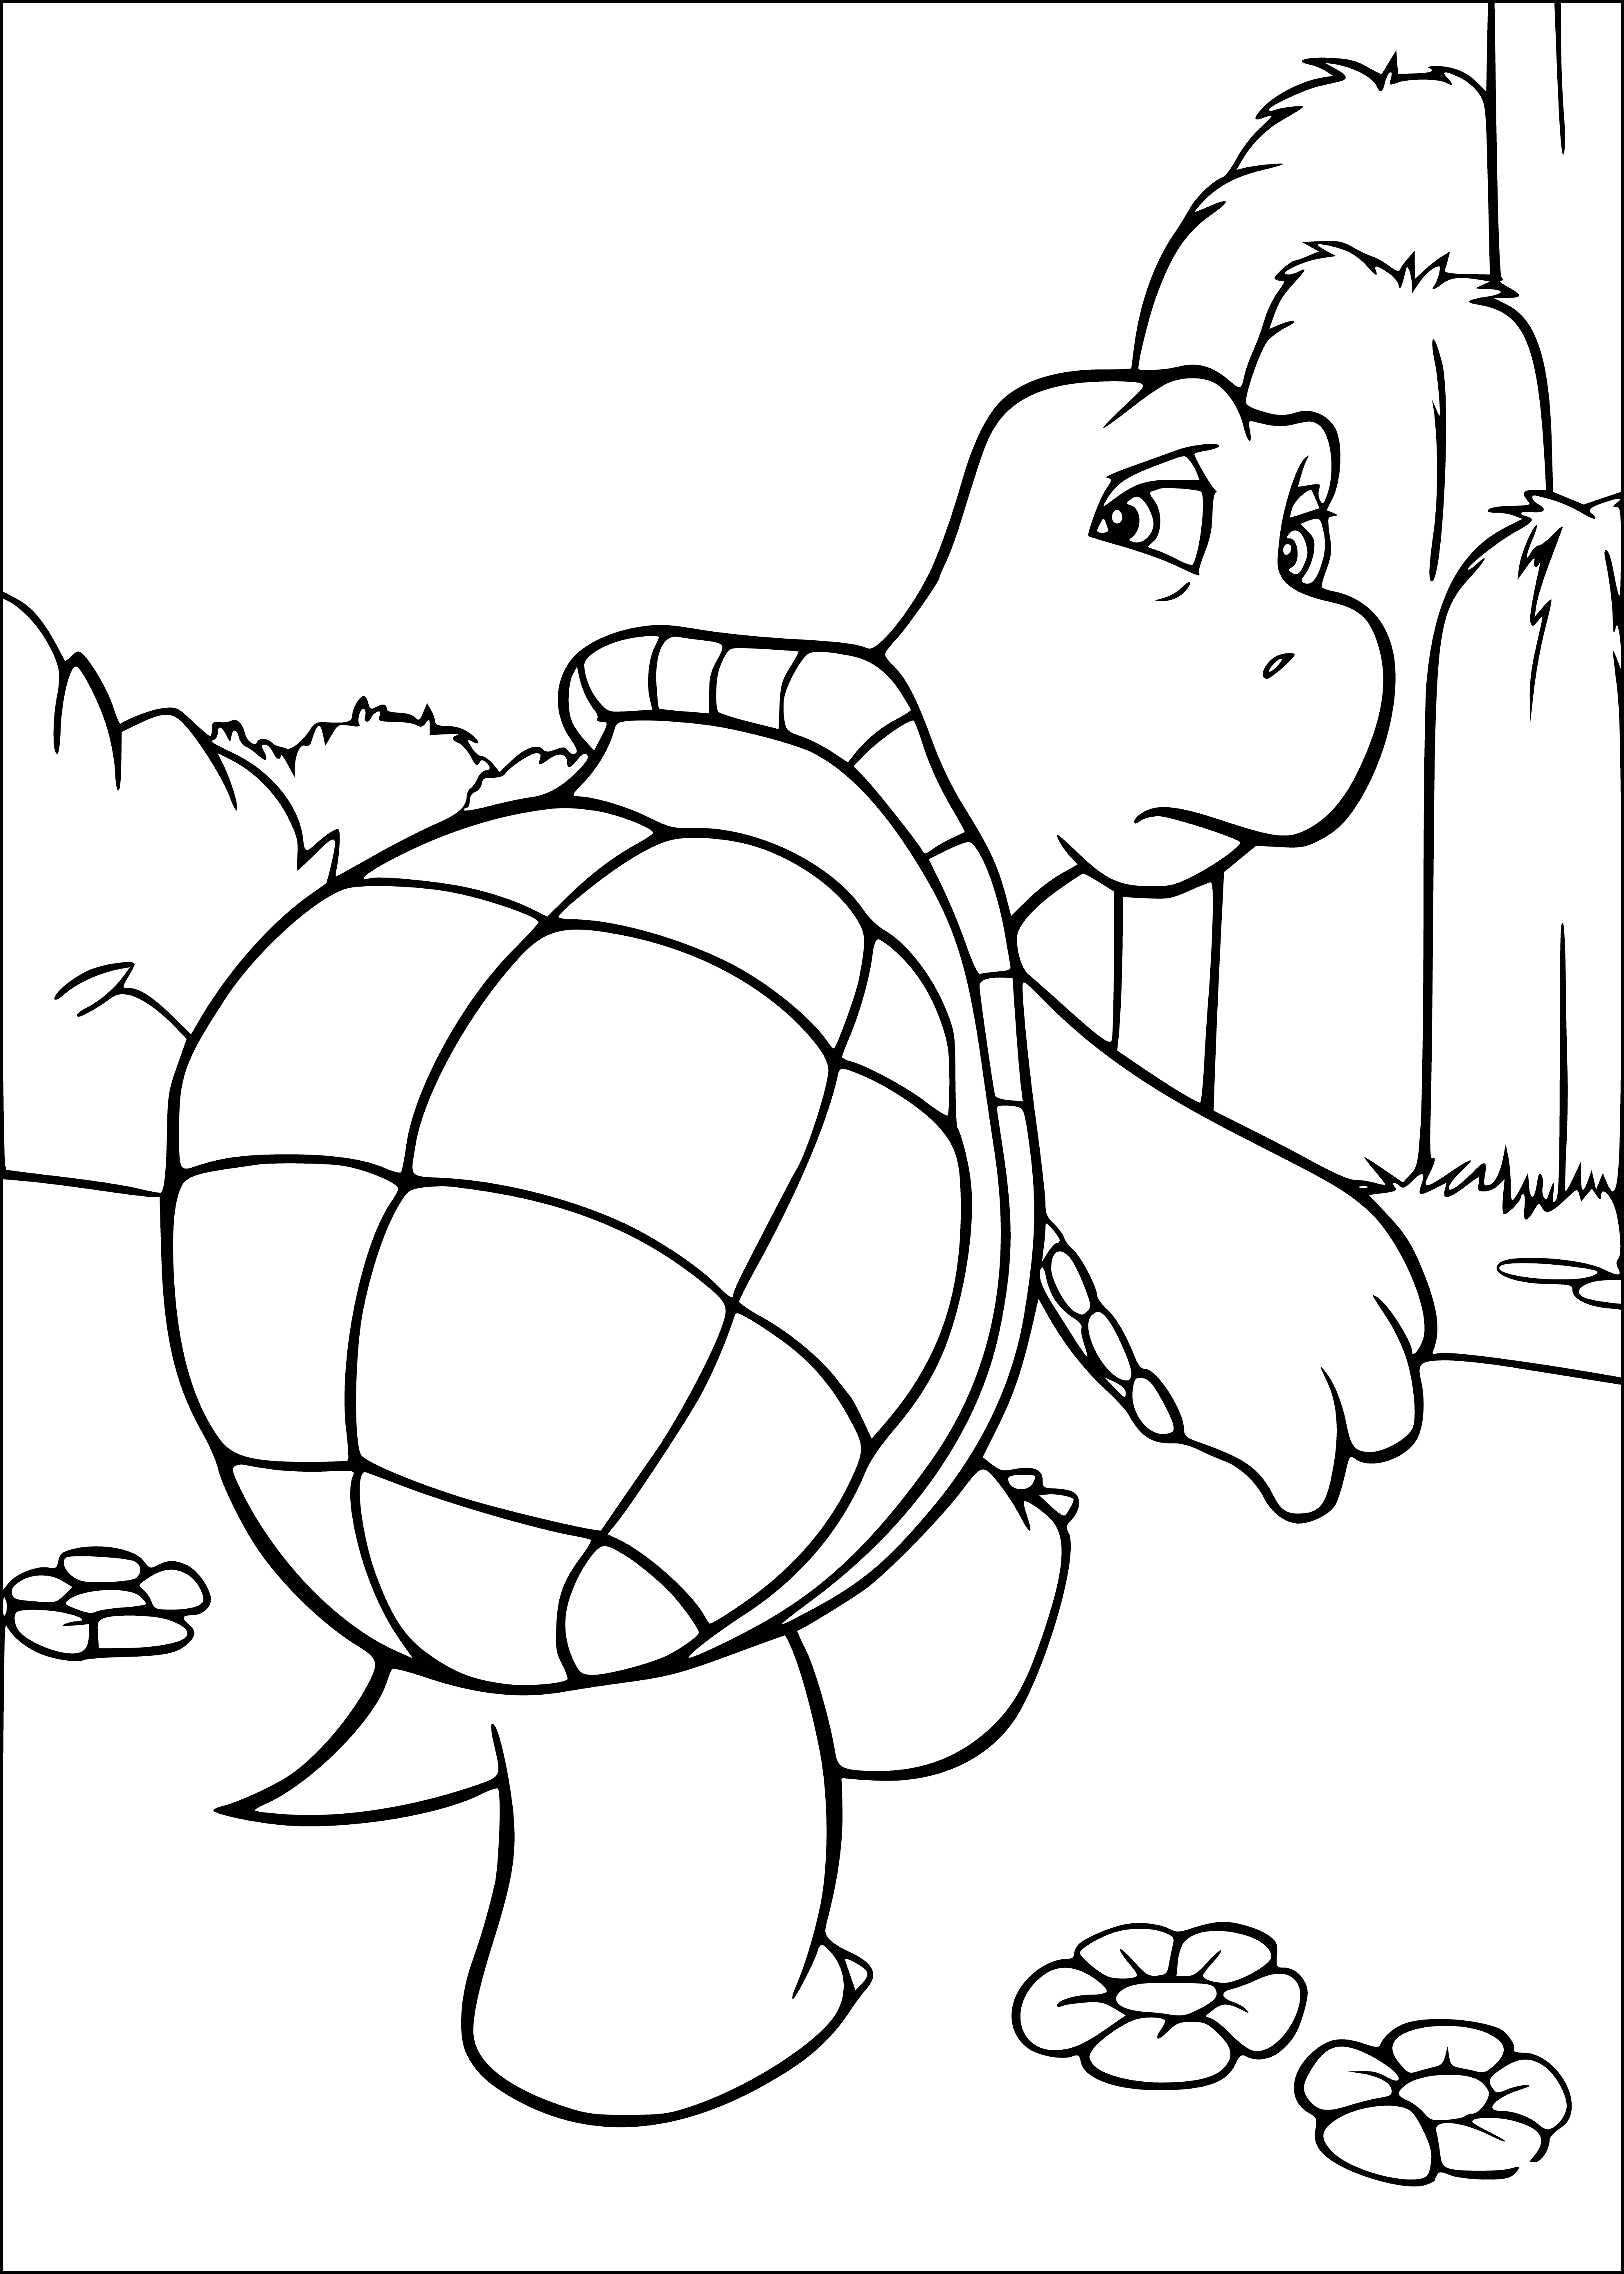 coloring page: Turtle crawls on ground with hard shell and long tail; green skin, white underside. Small head, two eyes, two sharp claws on feet.